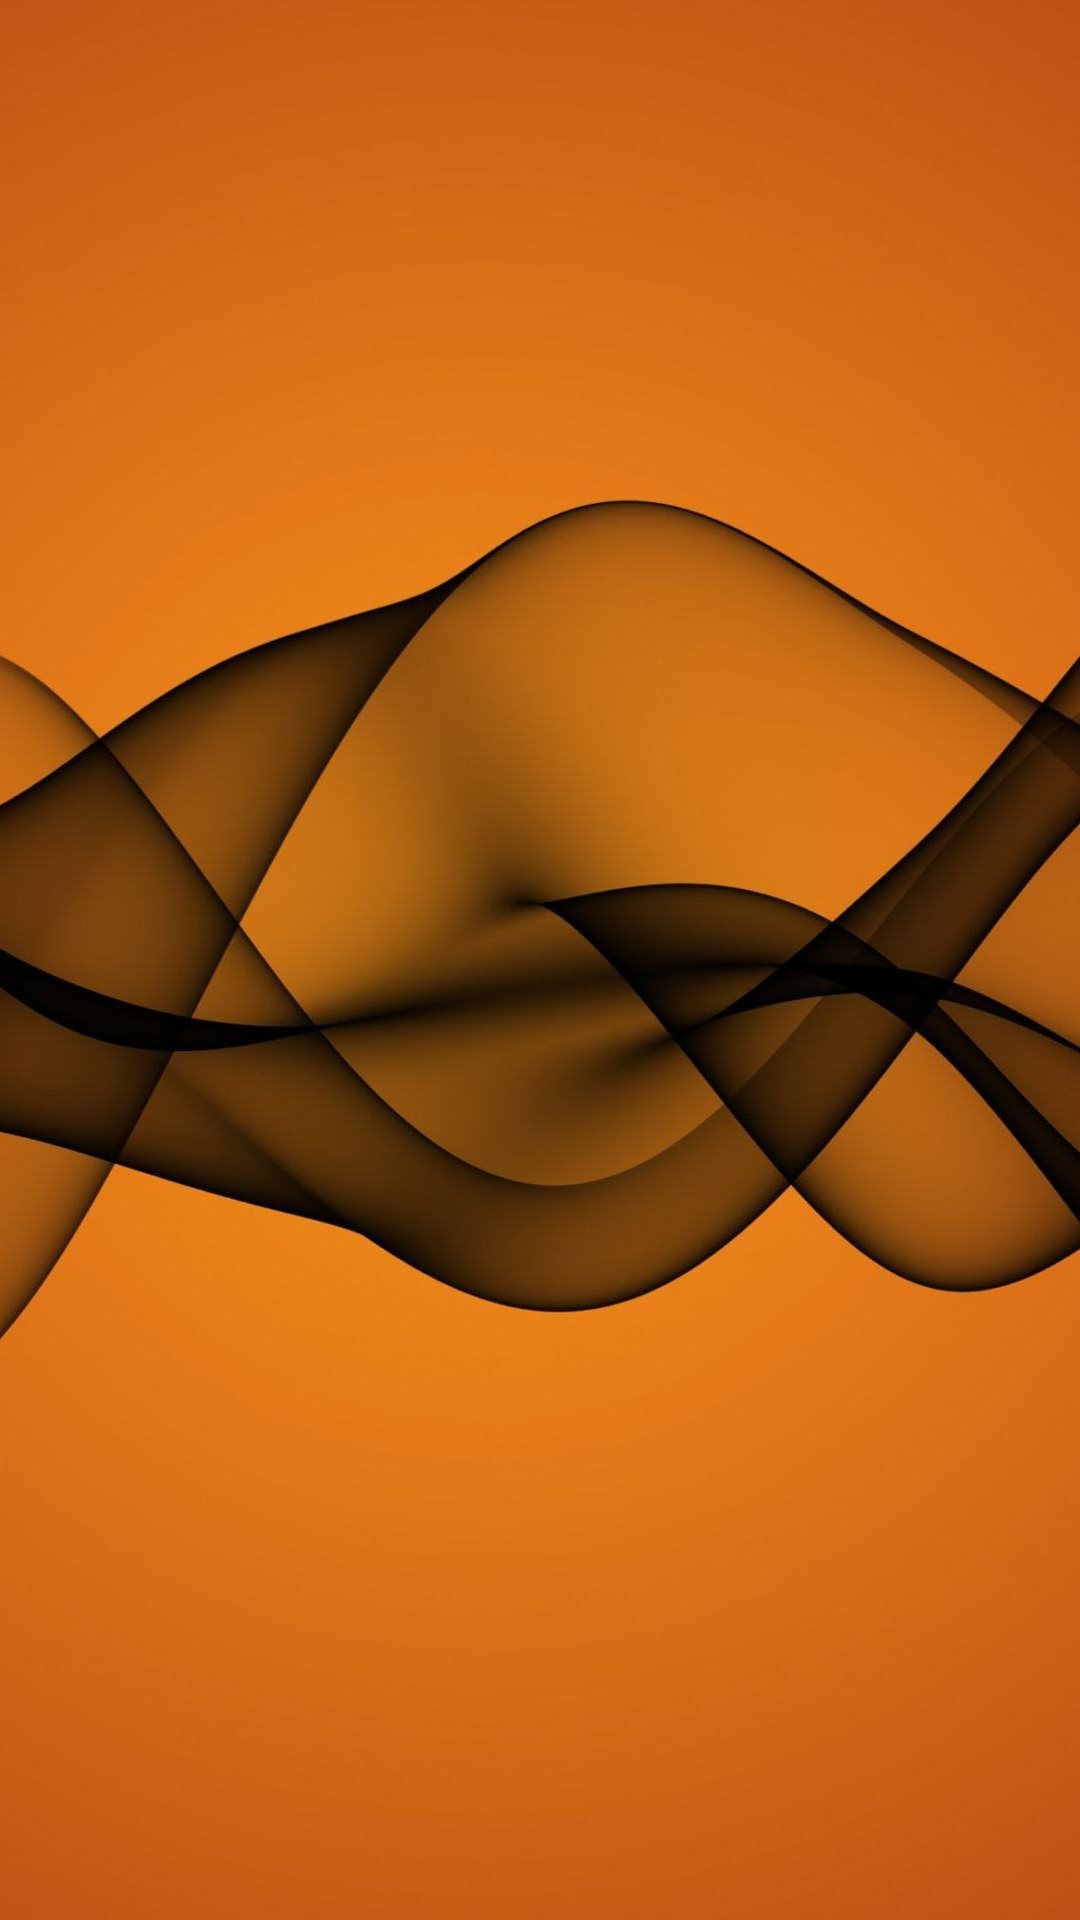 Abstract Black Shape Orange Background Android Wallpaper